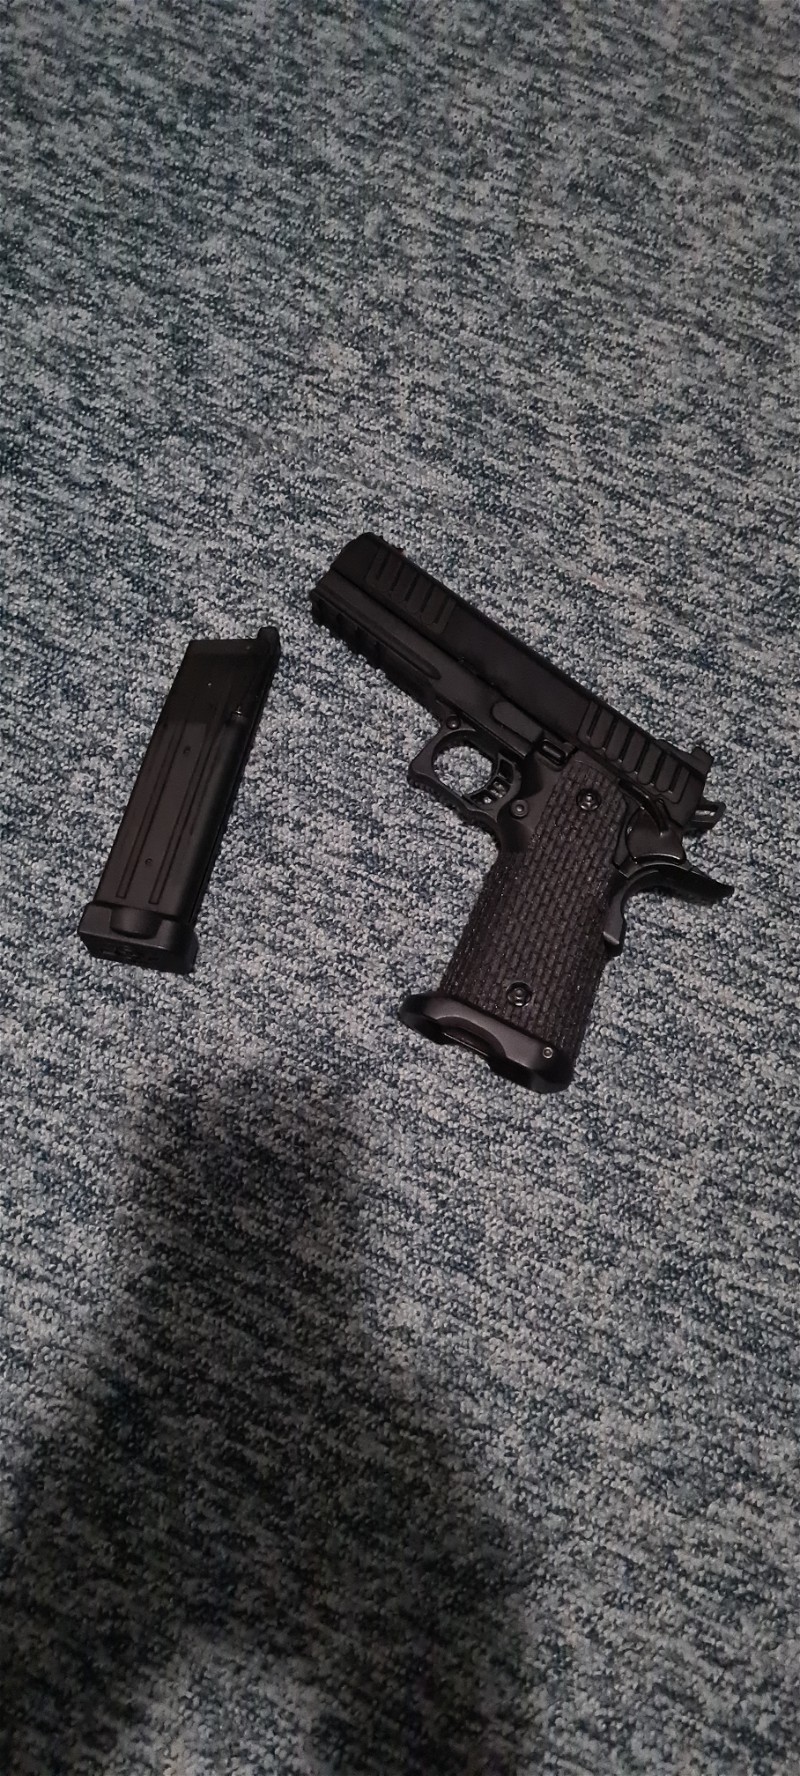 Image 1 for Army staccato p hi capa